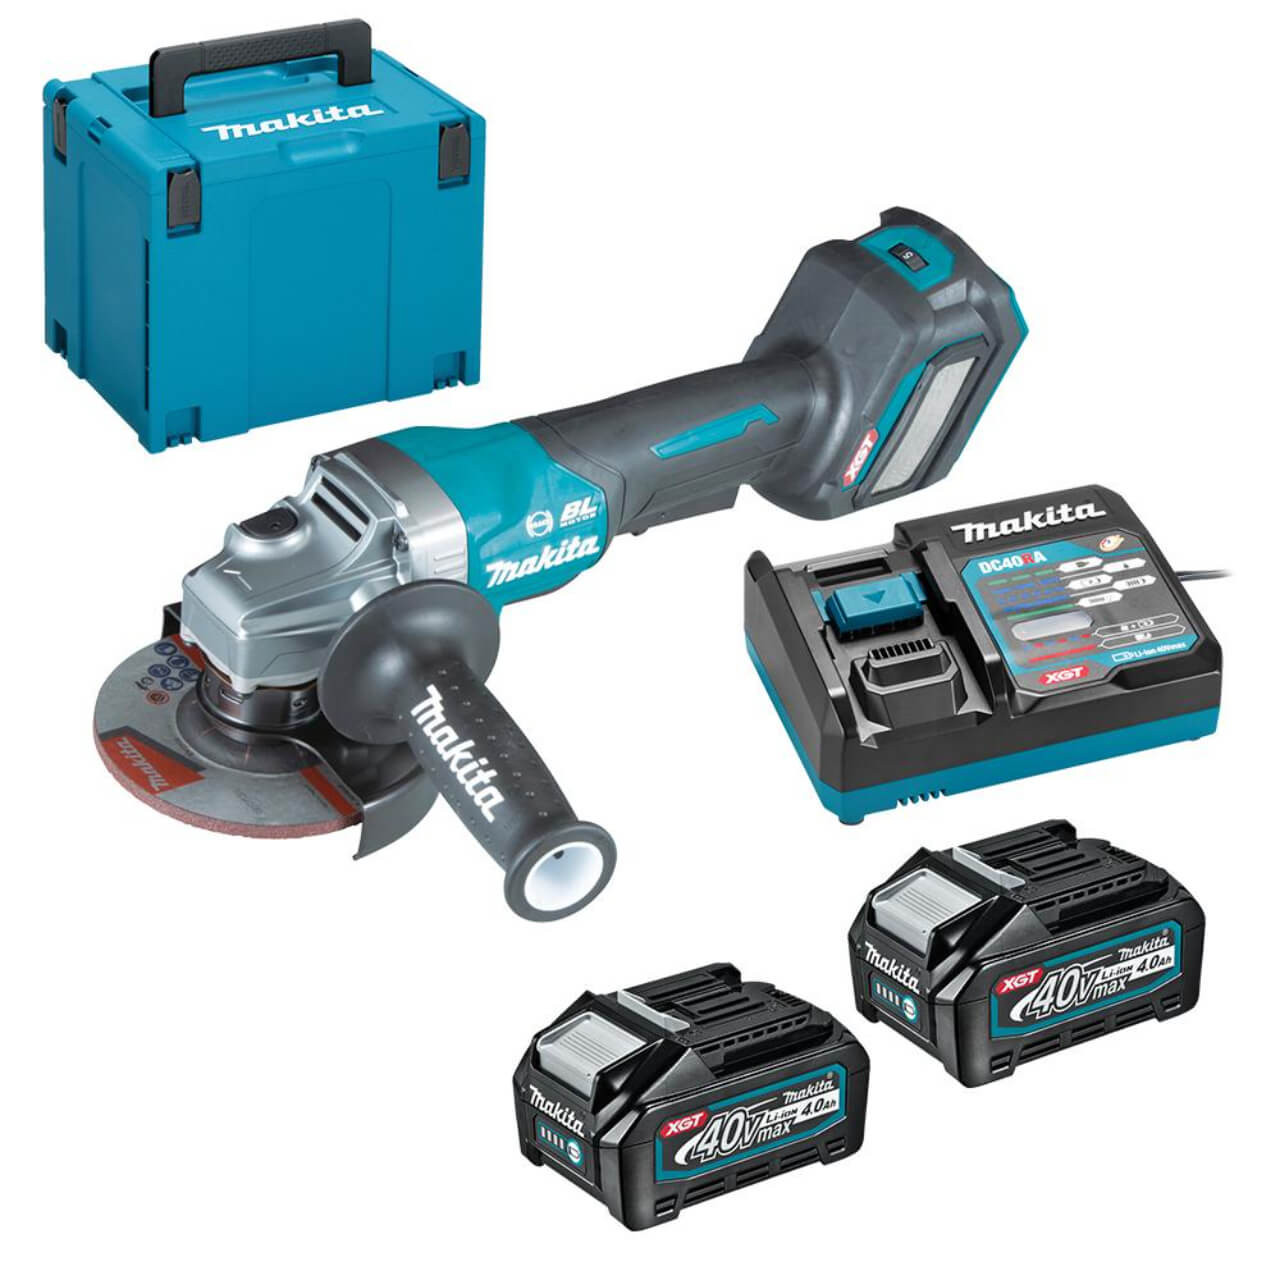 Makita 40V Max BRUSHLESS AWS* 125mm (5”) Angle Grinder. Paddle Switch. Variable Speed - Includes 2 x 4.0Ah Batteries. Single Port Rapid Charger & Makpac Case Type 4